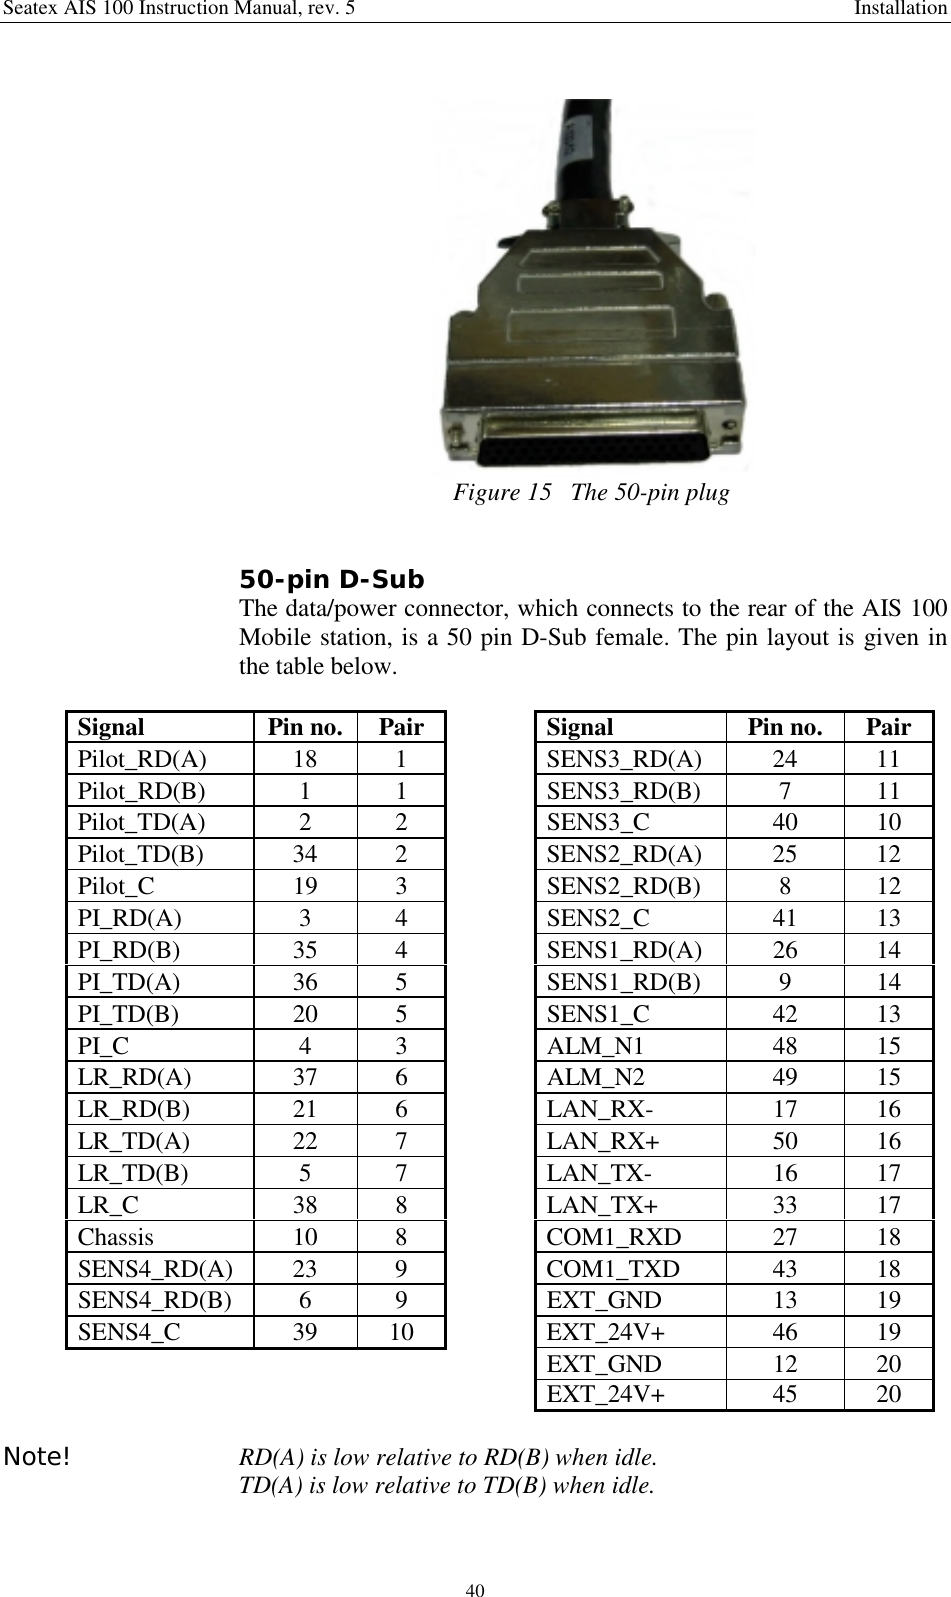 Seatex AIS 100 Instruction Manual, rev. 5 Installation40Figure 15   The 50-pin plug50-pin D-SubThe data/power connector, which connects to the rear of the AIS 100Mobile station, is a 50 pin D-Sub female. The pin layout is given inthe table below.Signal Pin no. Pair Signal Pin no. PairPilot_RD(A) 18 1 SENS3_RD(A) 24 11Pilot_RD(B) 1 1 SENS3_RD(B) 7 11Pilot_TD(A) 2 2 SENS3_C 40 10Pilot_TD(B) 34 2 SENS2_RD(A) 25 12Pilot_C 19 3 SENS2_RD(B) 8 12PI_RD(A) 3 4 SENS2_C 41 13PI_RD(B) 35 4 SENS1_RD(A) 26 14PI_TD(A) 36 5 SENS1_RD(B) 9 14PI_TD(B) 20 5 SENS1_C 42 13PI_C 4 3 ALM_N1 48 15LR_RD(A) 37 6 ALM_N2 49 15LR_RD(B) 21 6 LAN_RX- 17 16LR_TD(A) 22 7 LAN_RX+ 50 16LR_TD(B) 5 7 LAN_TX- 16 17LR_C 38 8 LAN_TX+ 33 17Chassis 10 8 COM1_RXD 27 18SENS4_RD(A) 23 9 COM1_TXD 43 18SENS4_RD(B) 6 9 EXT_GND 13 19SENS4_C 39 10 EXT_24V+ 46 19EXT_GND 12 20EXT_24V+ 45 20Note! RD(A) is low relative to RD(B) when idle.   TD(A) is low relative to TD(B) when idle.